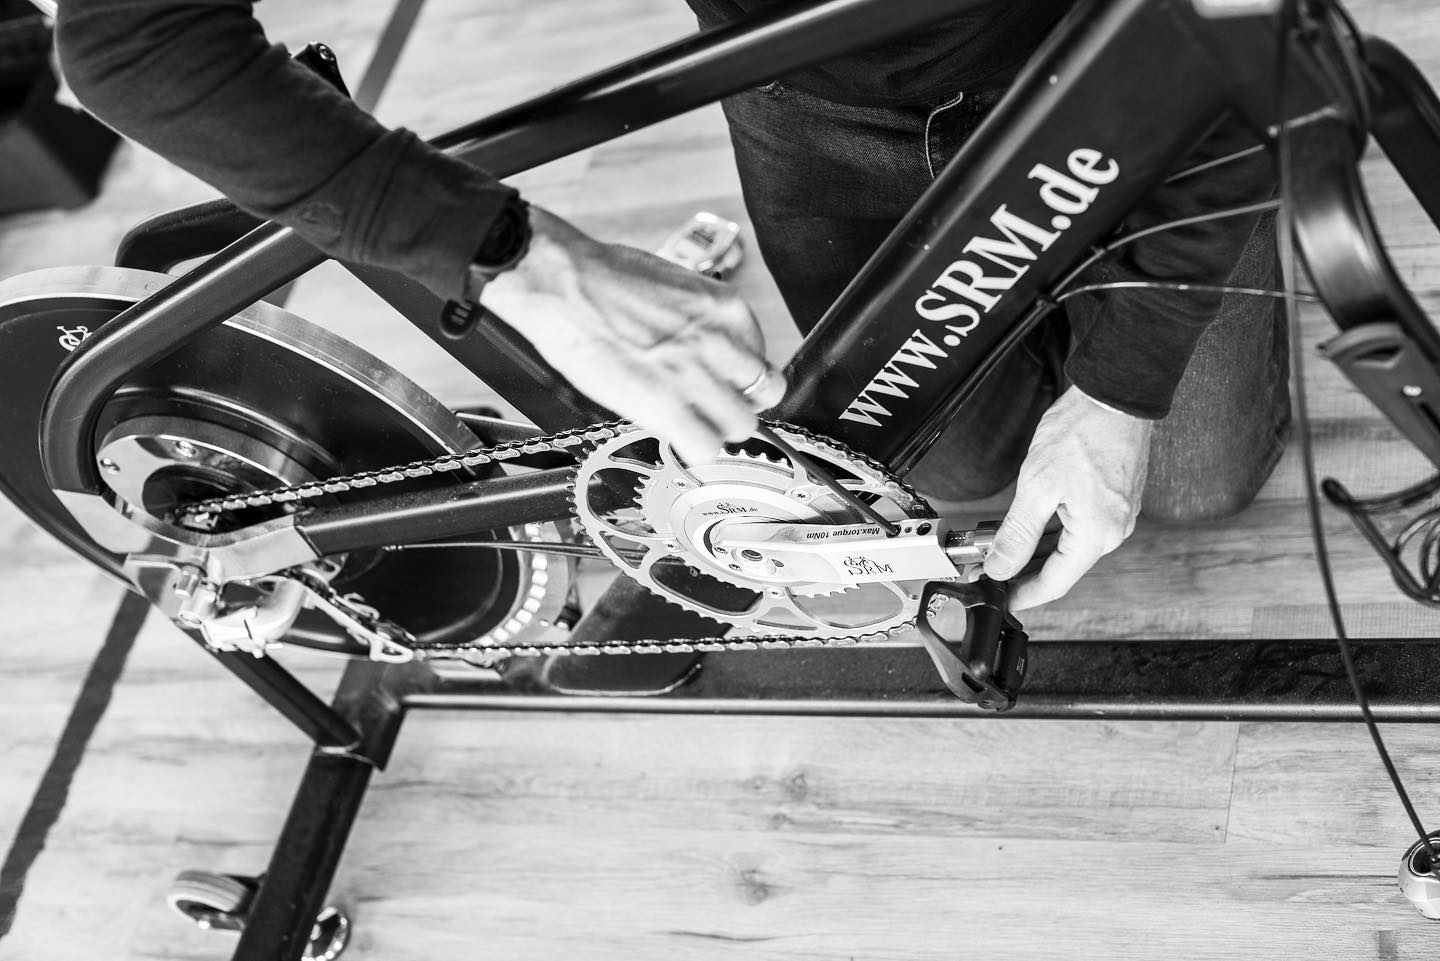 Experimenting with lever length on the SRM ✔️
.
Crank selection is rarely a black and white decision, but a series of considered compromises focused on a specific rider with specific physiology and objectives.
.
The key is to find the optimum balance, which is best done by testing, both in the studio and in the real world.
.
📸 @alanbartonphotographer
.
#bikefit #bikefitting #bikefitter #cycling #cyclingbiomechanics #cyclinglife #cranklength #srm